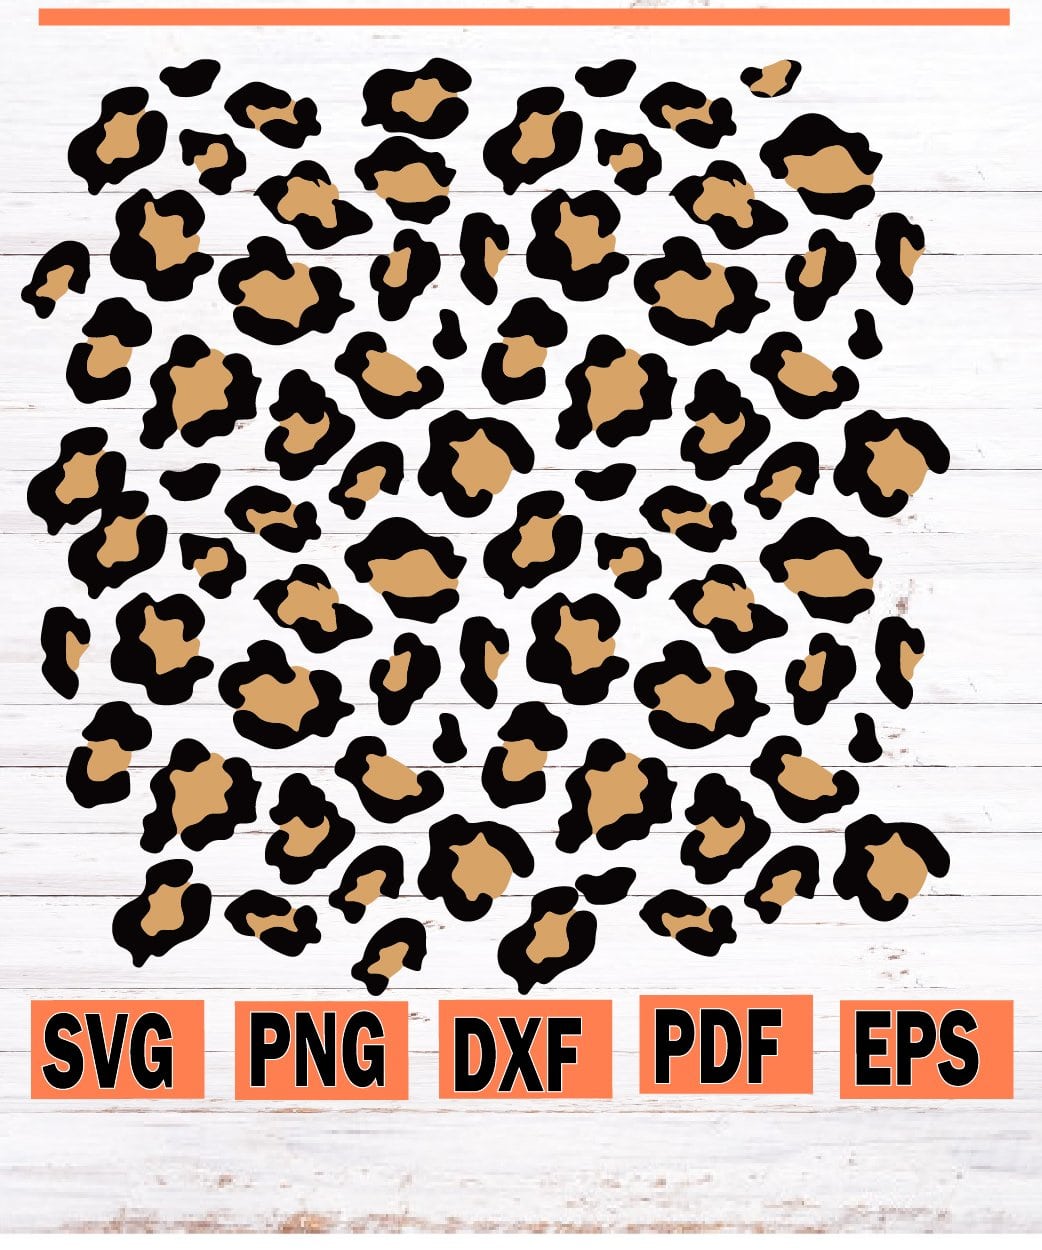 Layered Leopard Print SVGs, Leopard SVG, Leopard Texture Svgs, Cheetah Print,  Two Color Layered Leopard Pattern for Cricut, Vinyl Decal File - So Fontsy